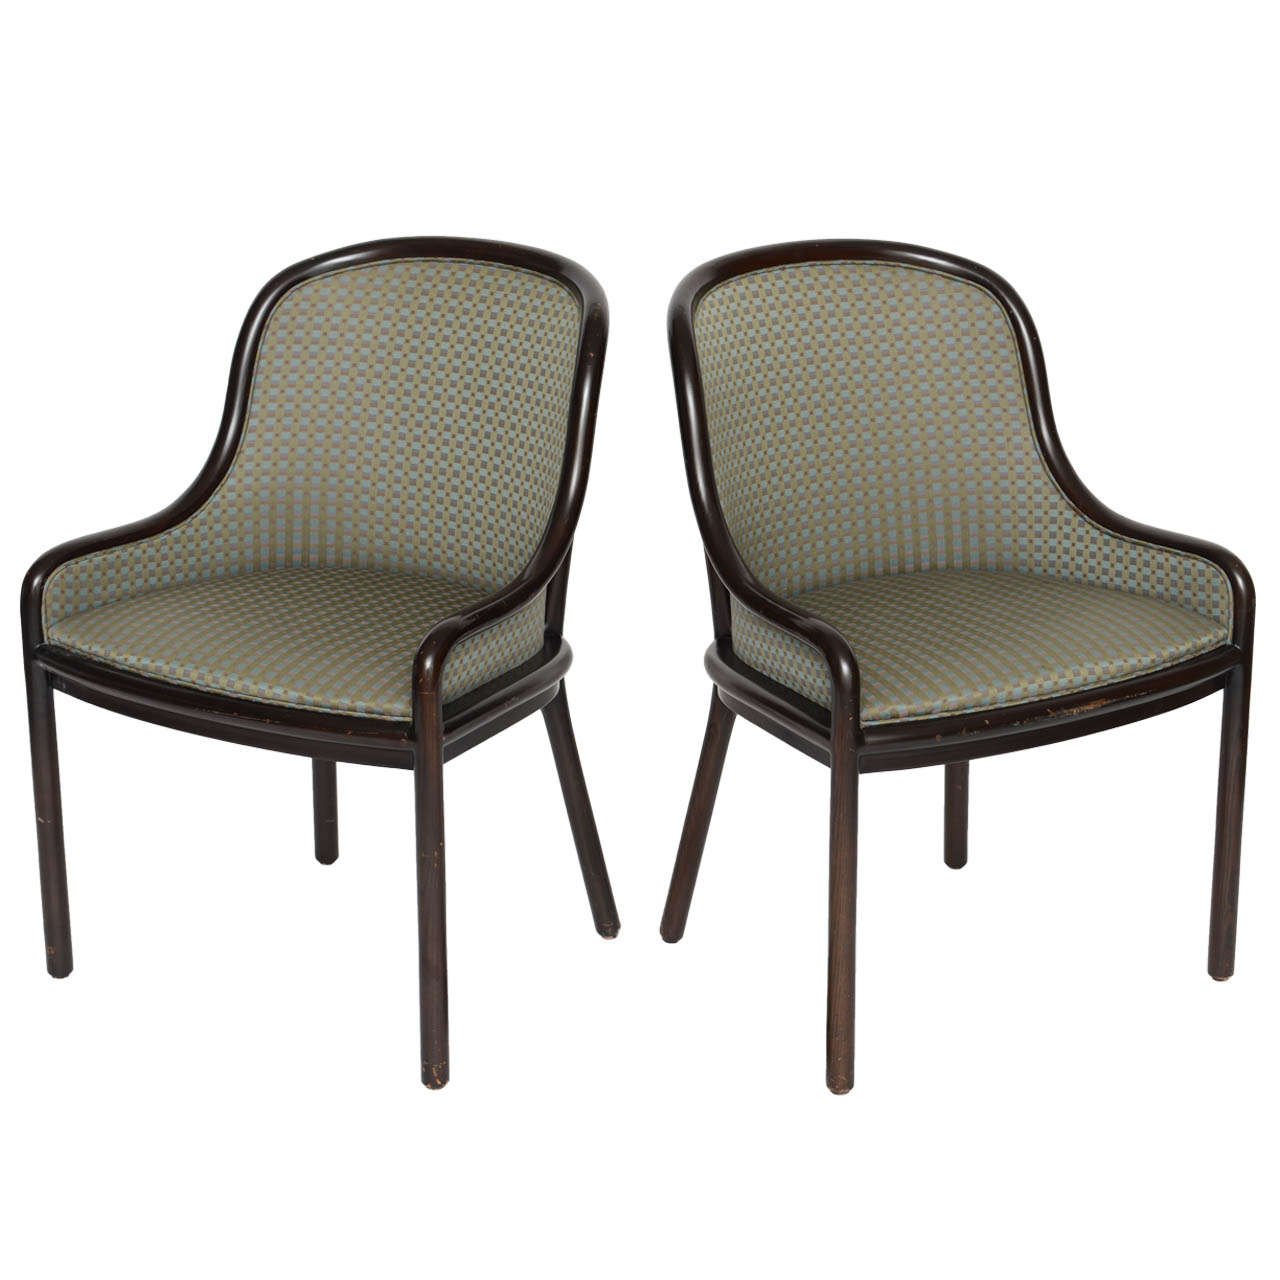 Pair of Ward Bennett Chairs for Brickell 1970s